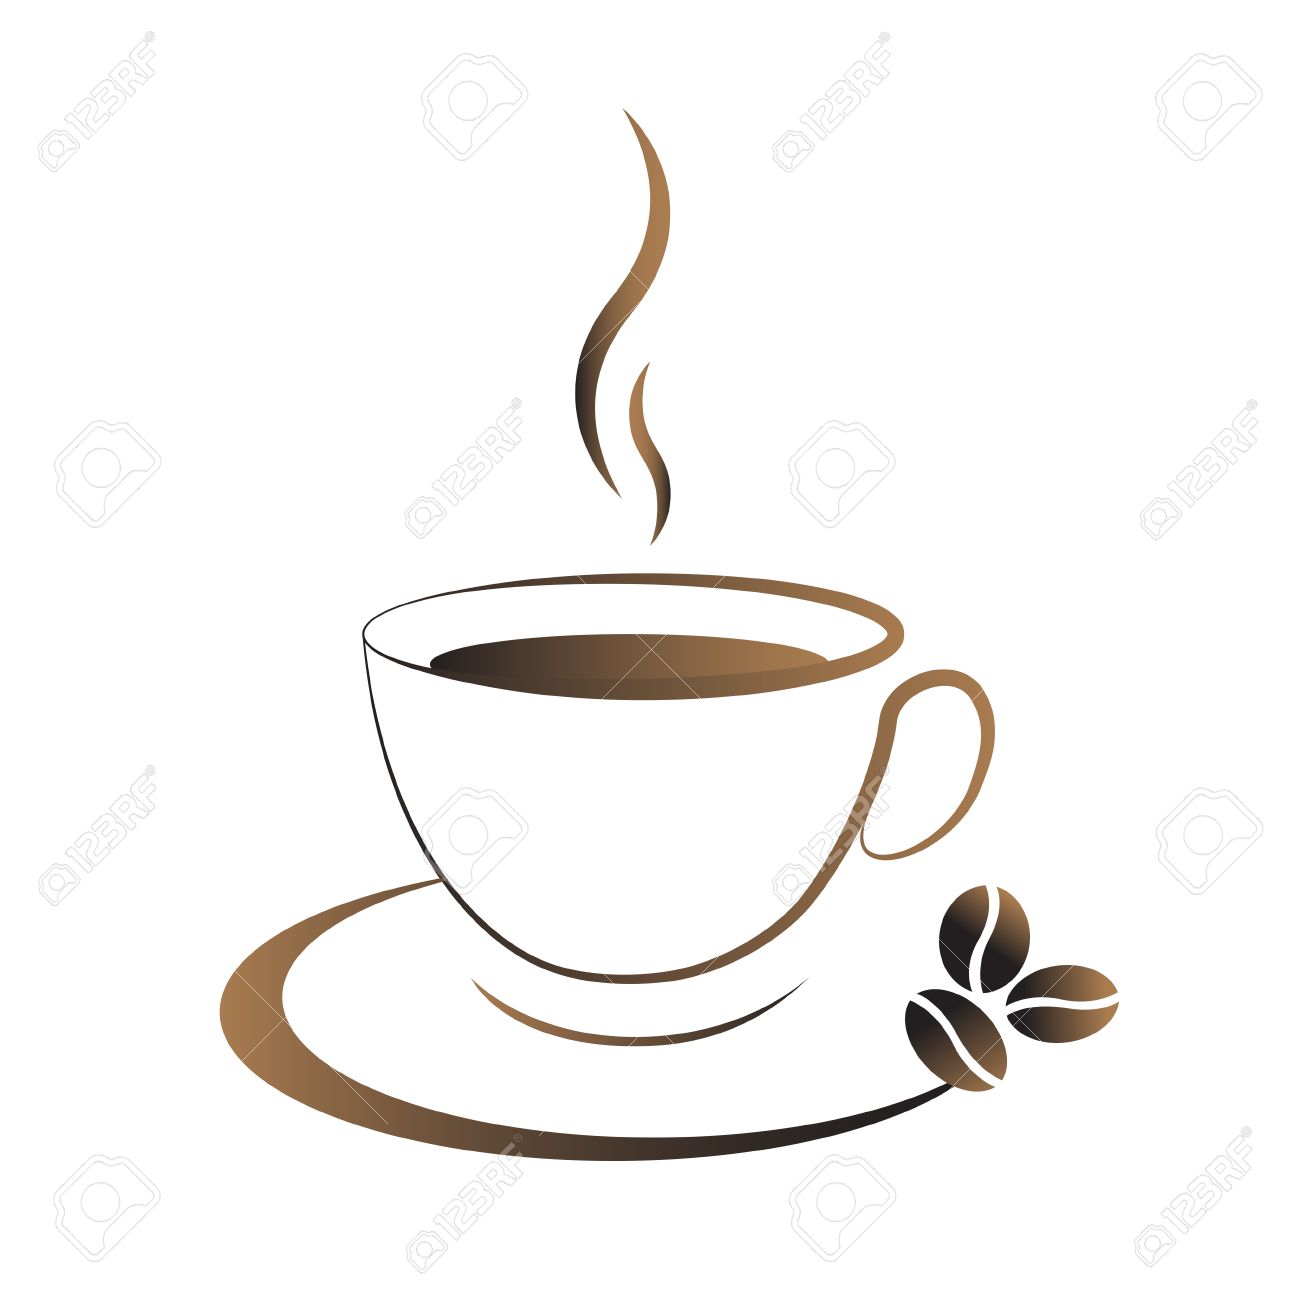 Coffee cup icon Clipart Vector Graphics. 48,730 Coffee cup icon 